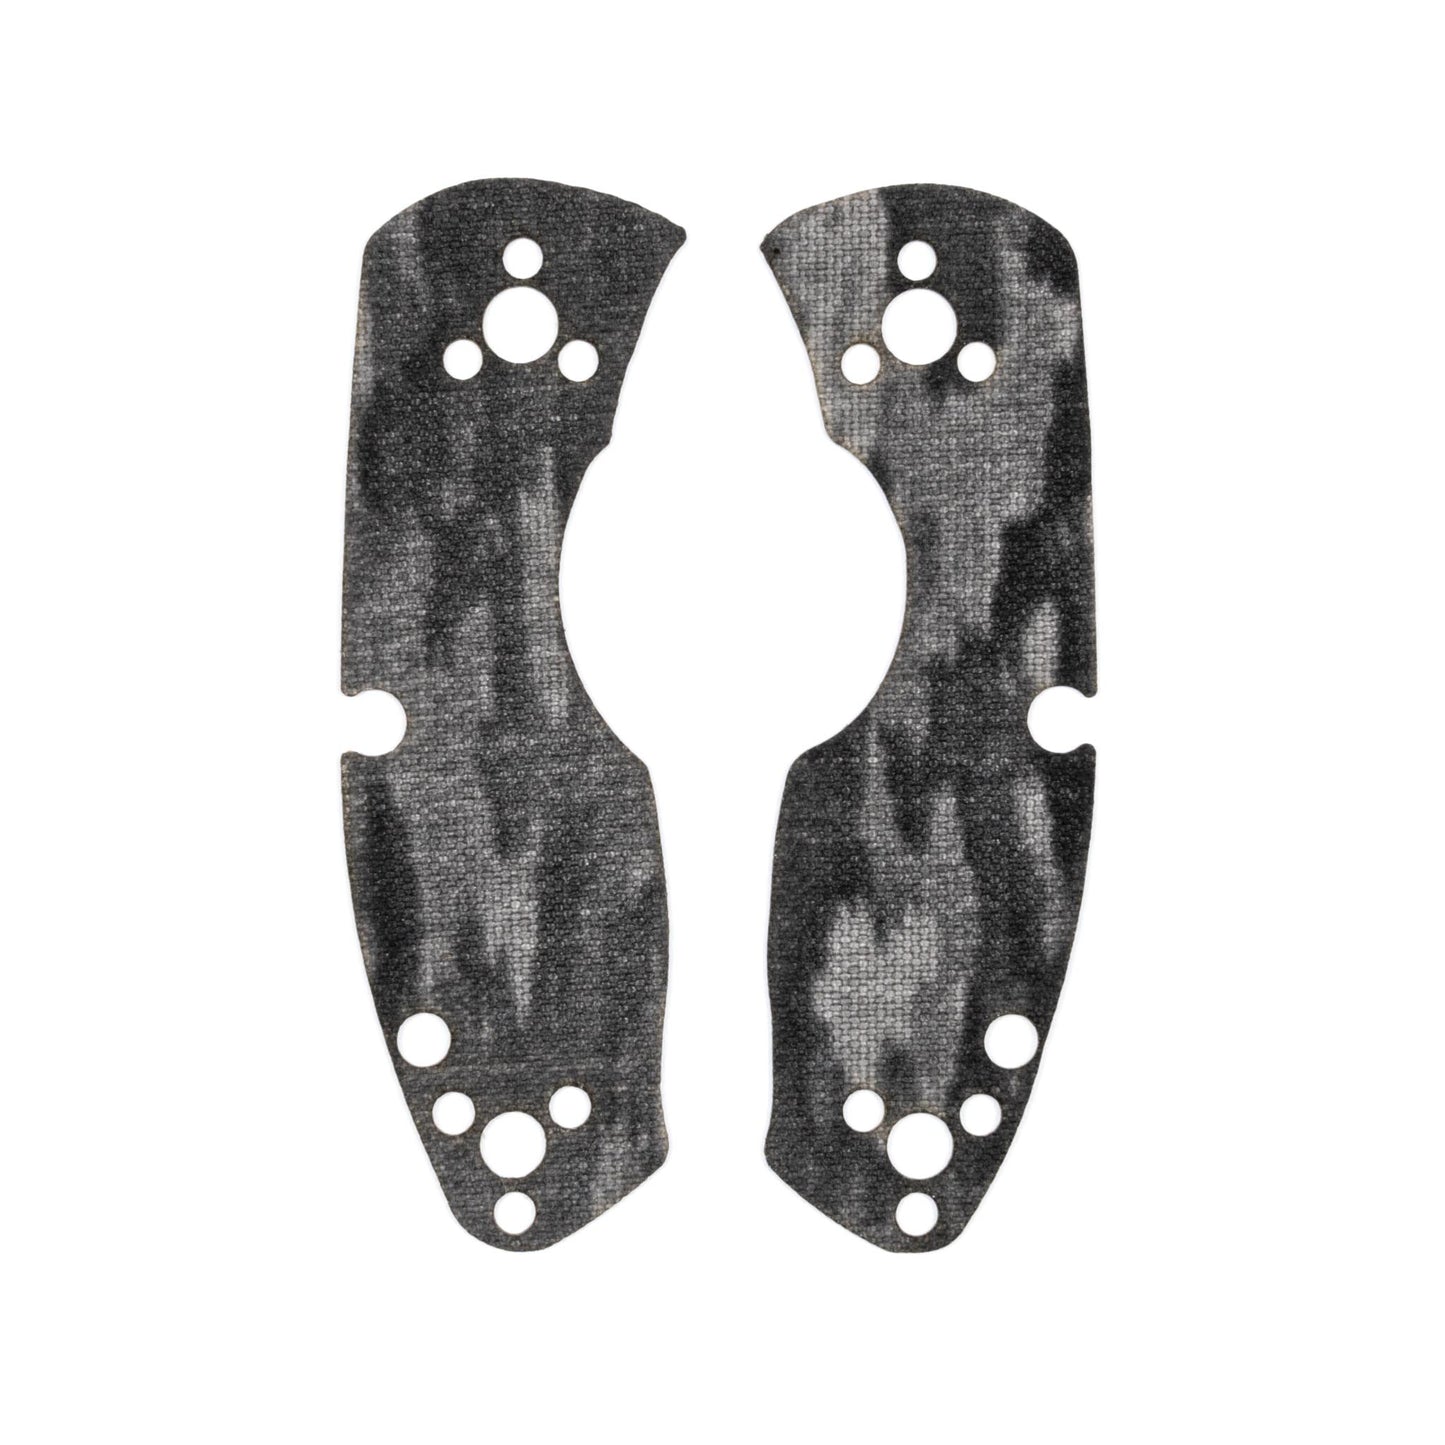 Spyderco Ambitious Skin Sets